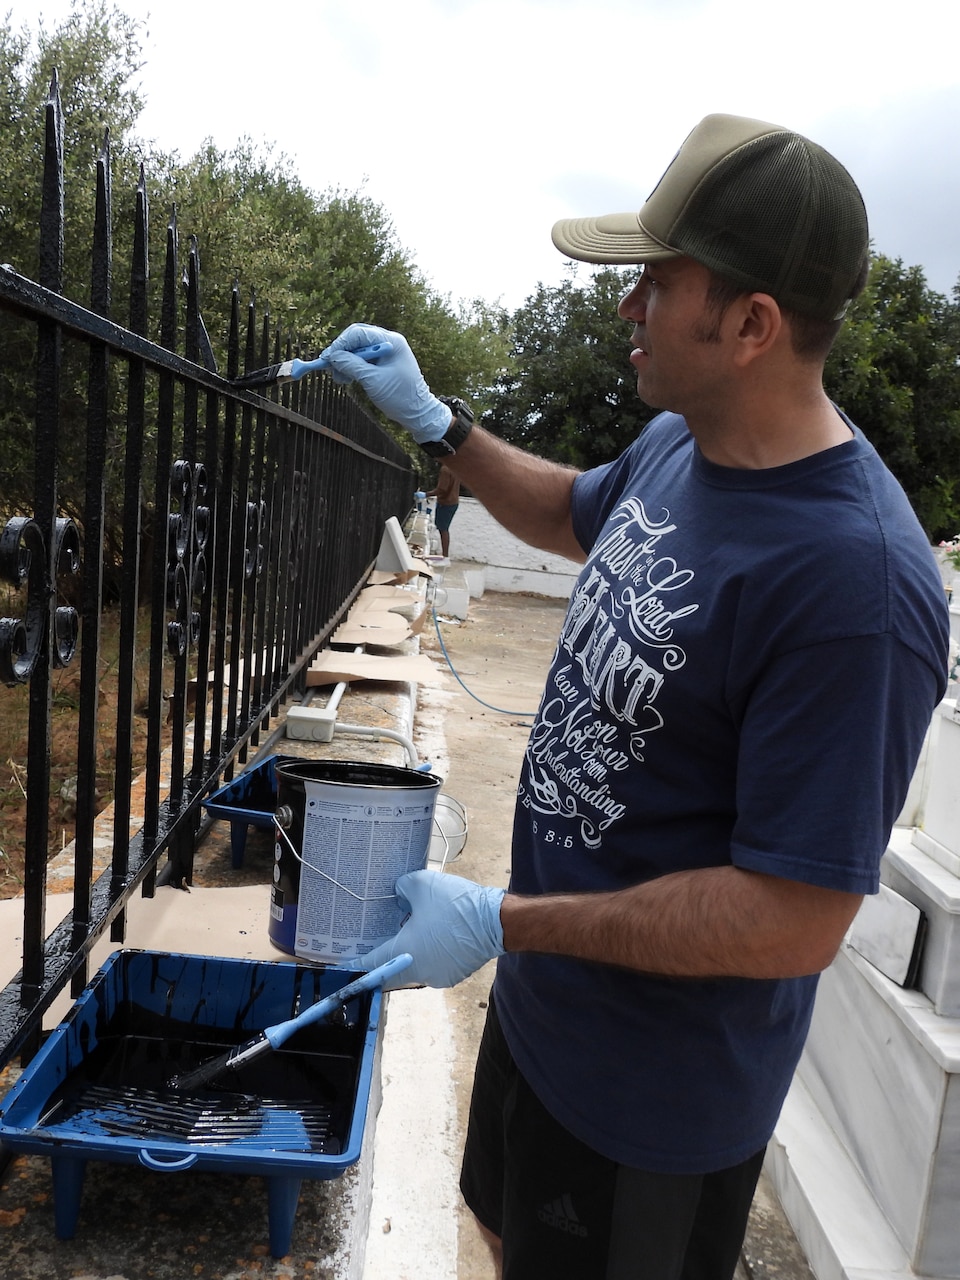 Lt. Juan Garcia, assigned to the Nimitz-class aircraft carrier USS Dwight D. Eisenhower (CVN 69), paints a fence during a two-day community relations project at the St. Ioannis Orthodox church in Mouzouras, Chania on April 29-30 as part of their regularly scheduled port visit.